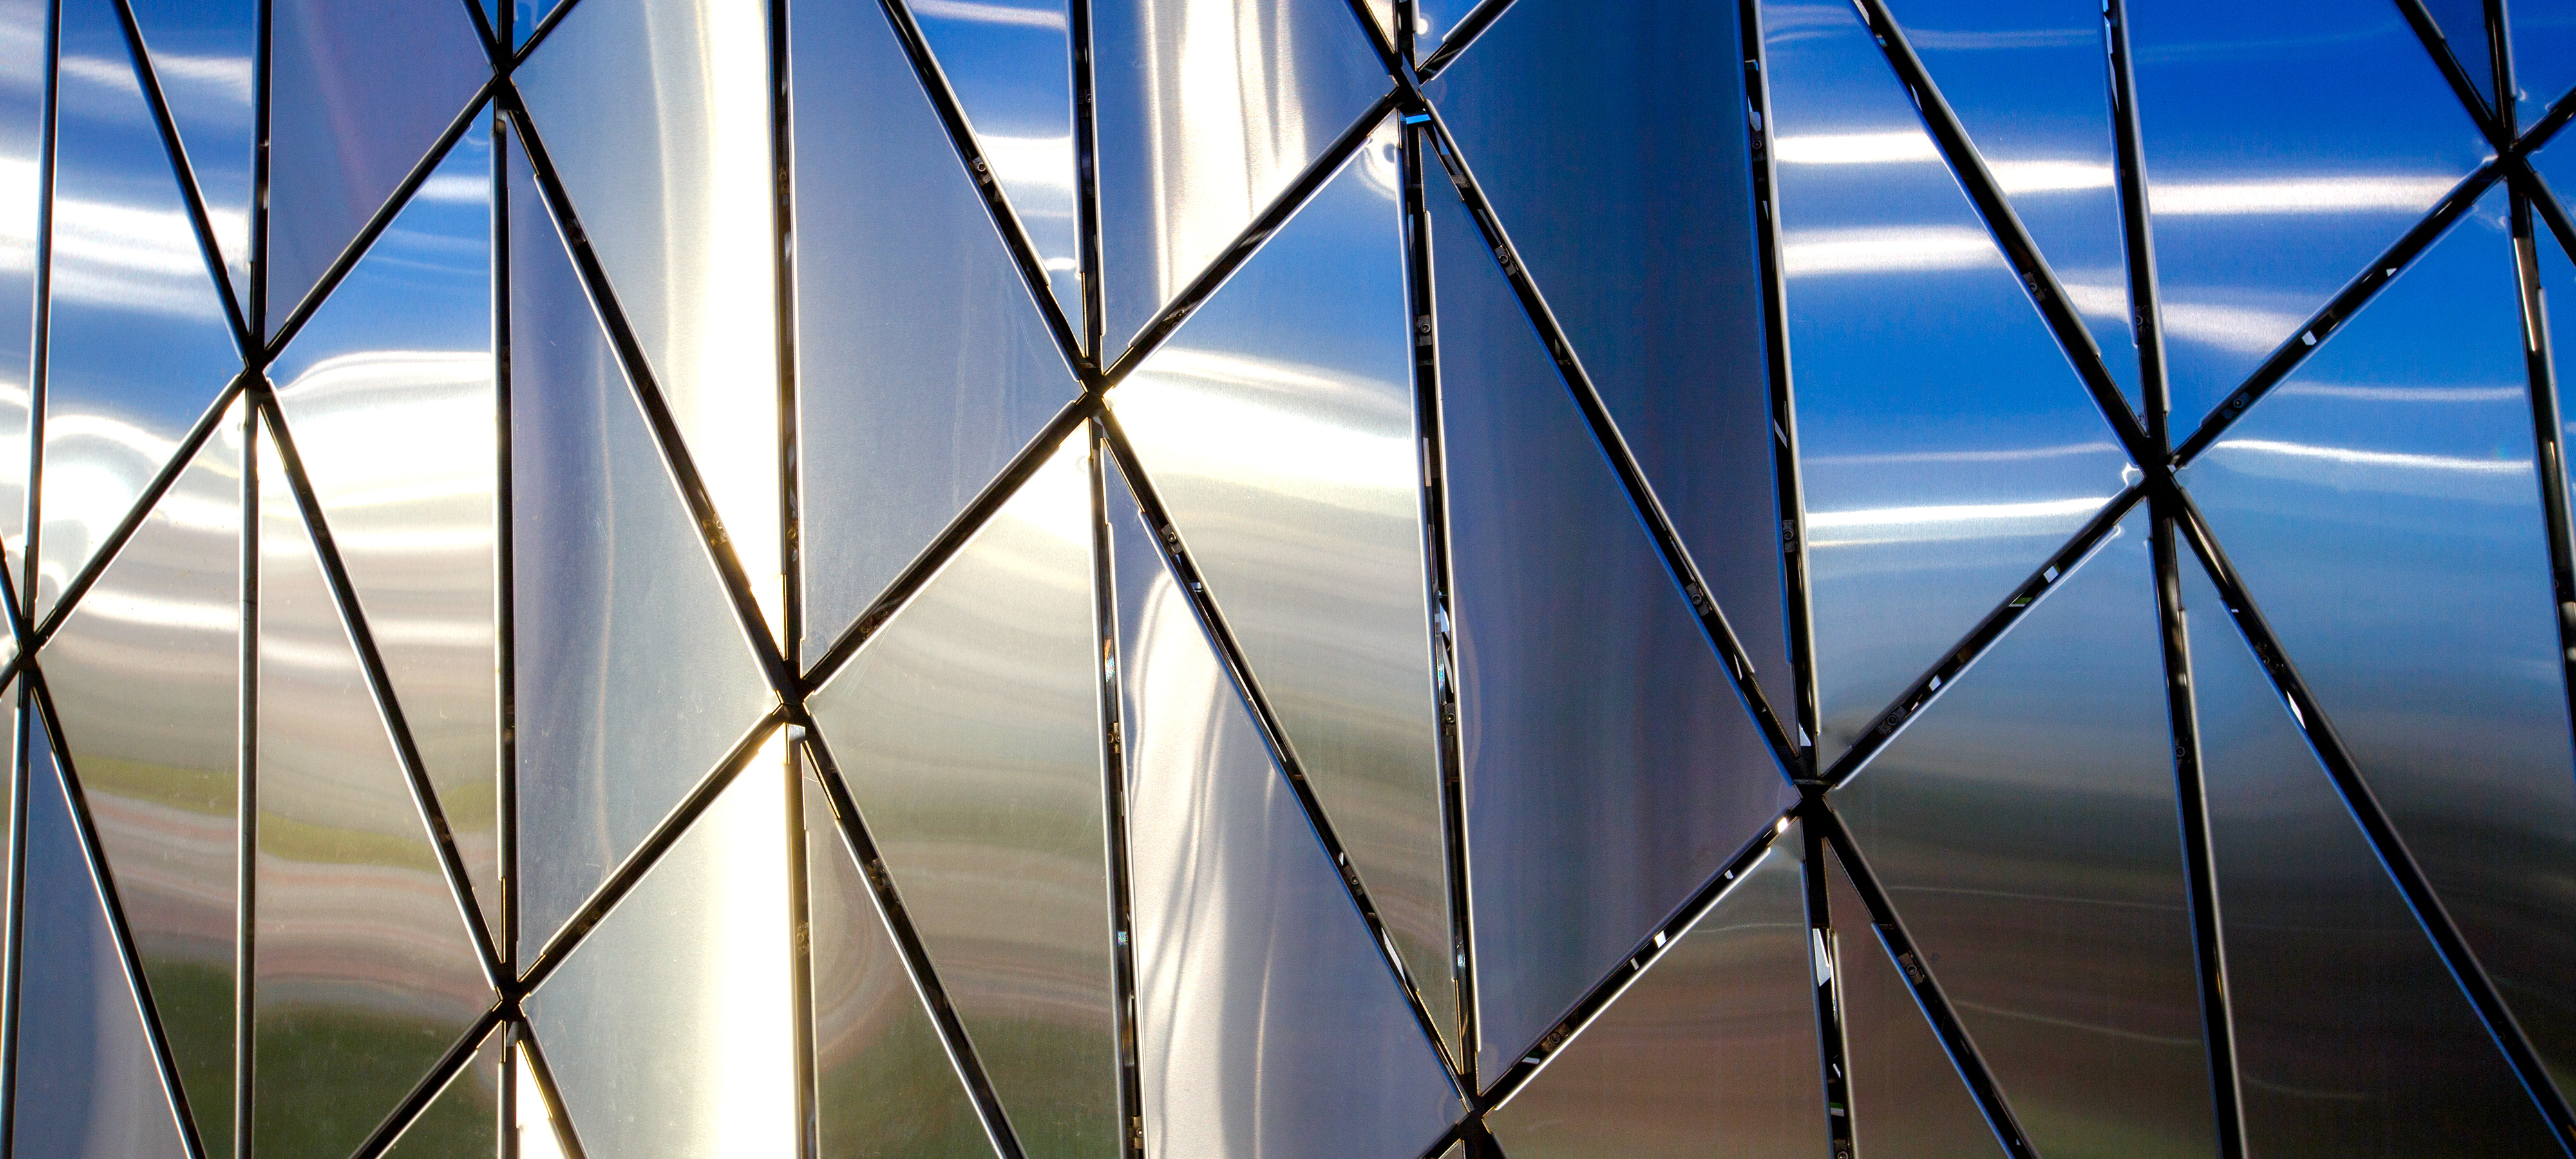 A close-up image of a building in Russia with an abstract pattern of triangular-shaped polished metal panels.